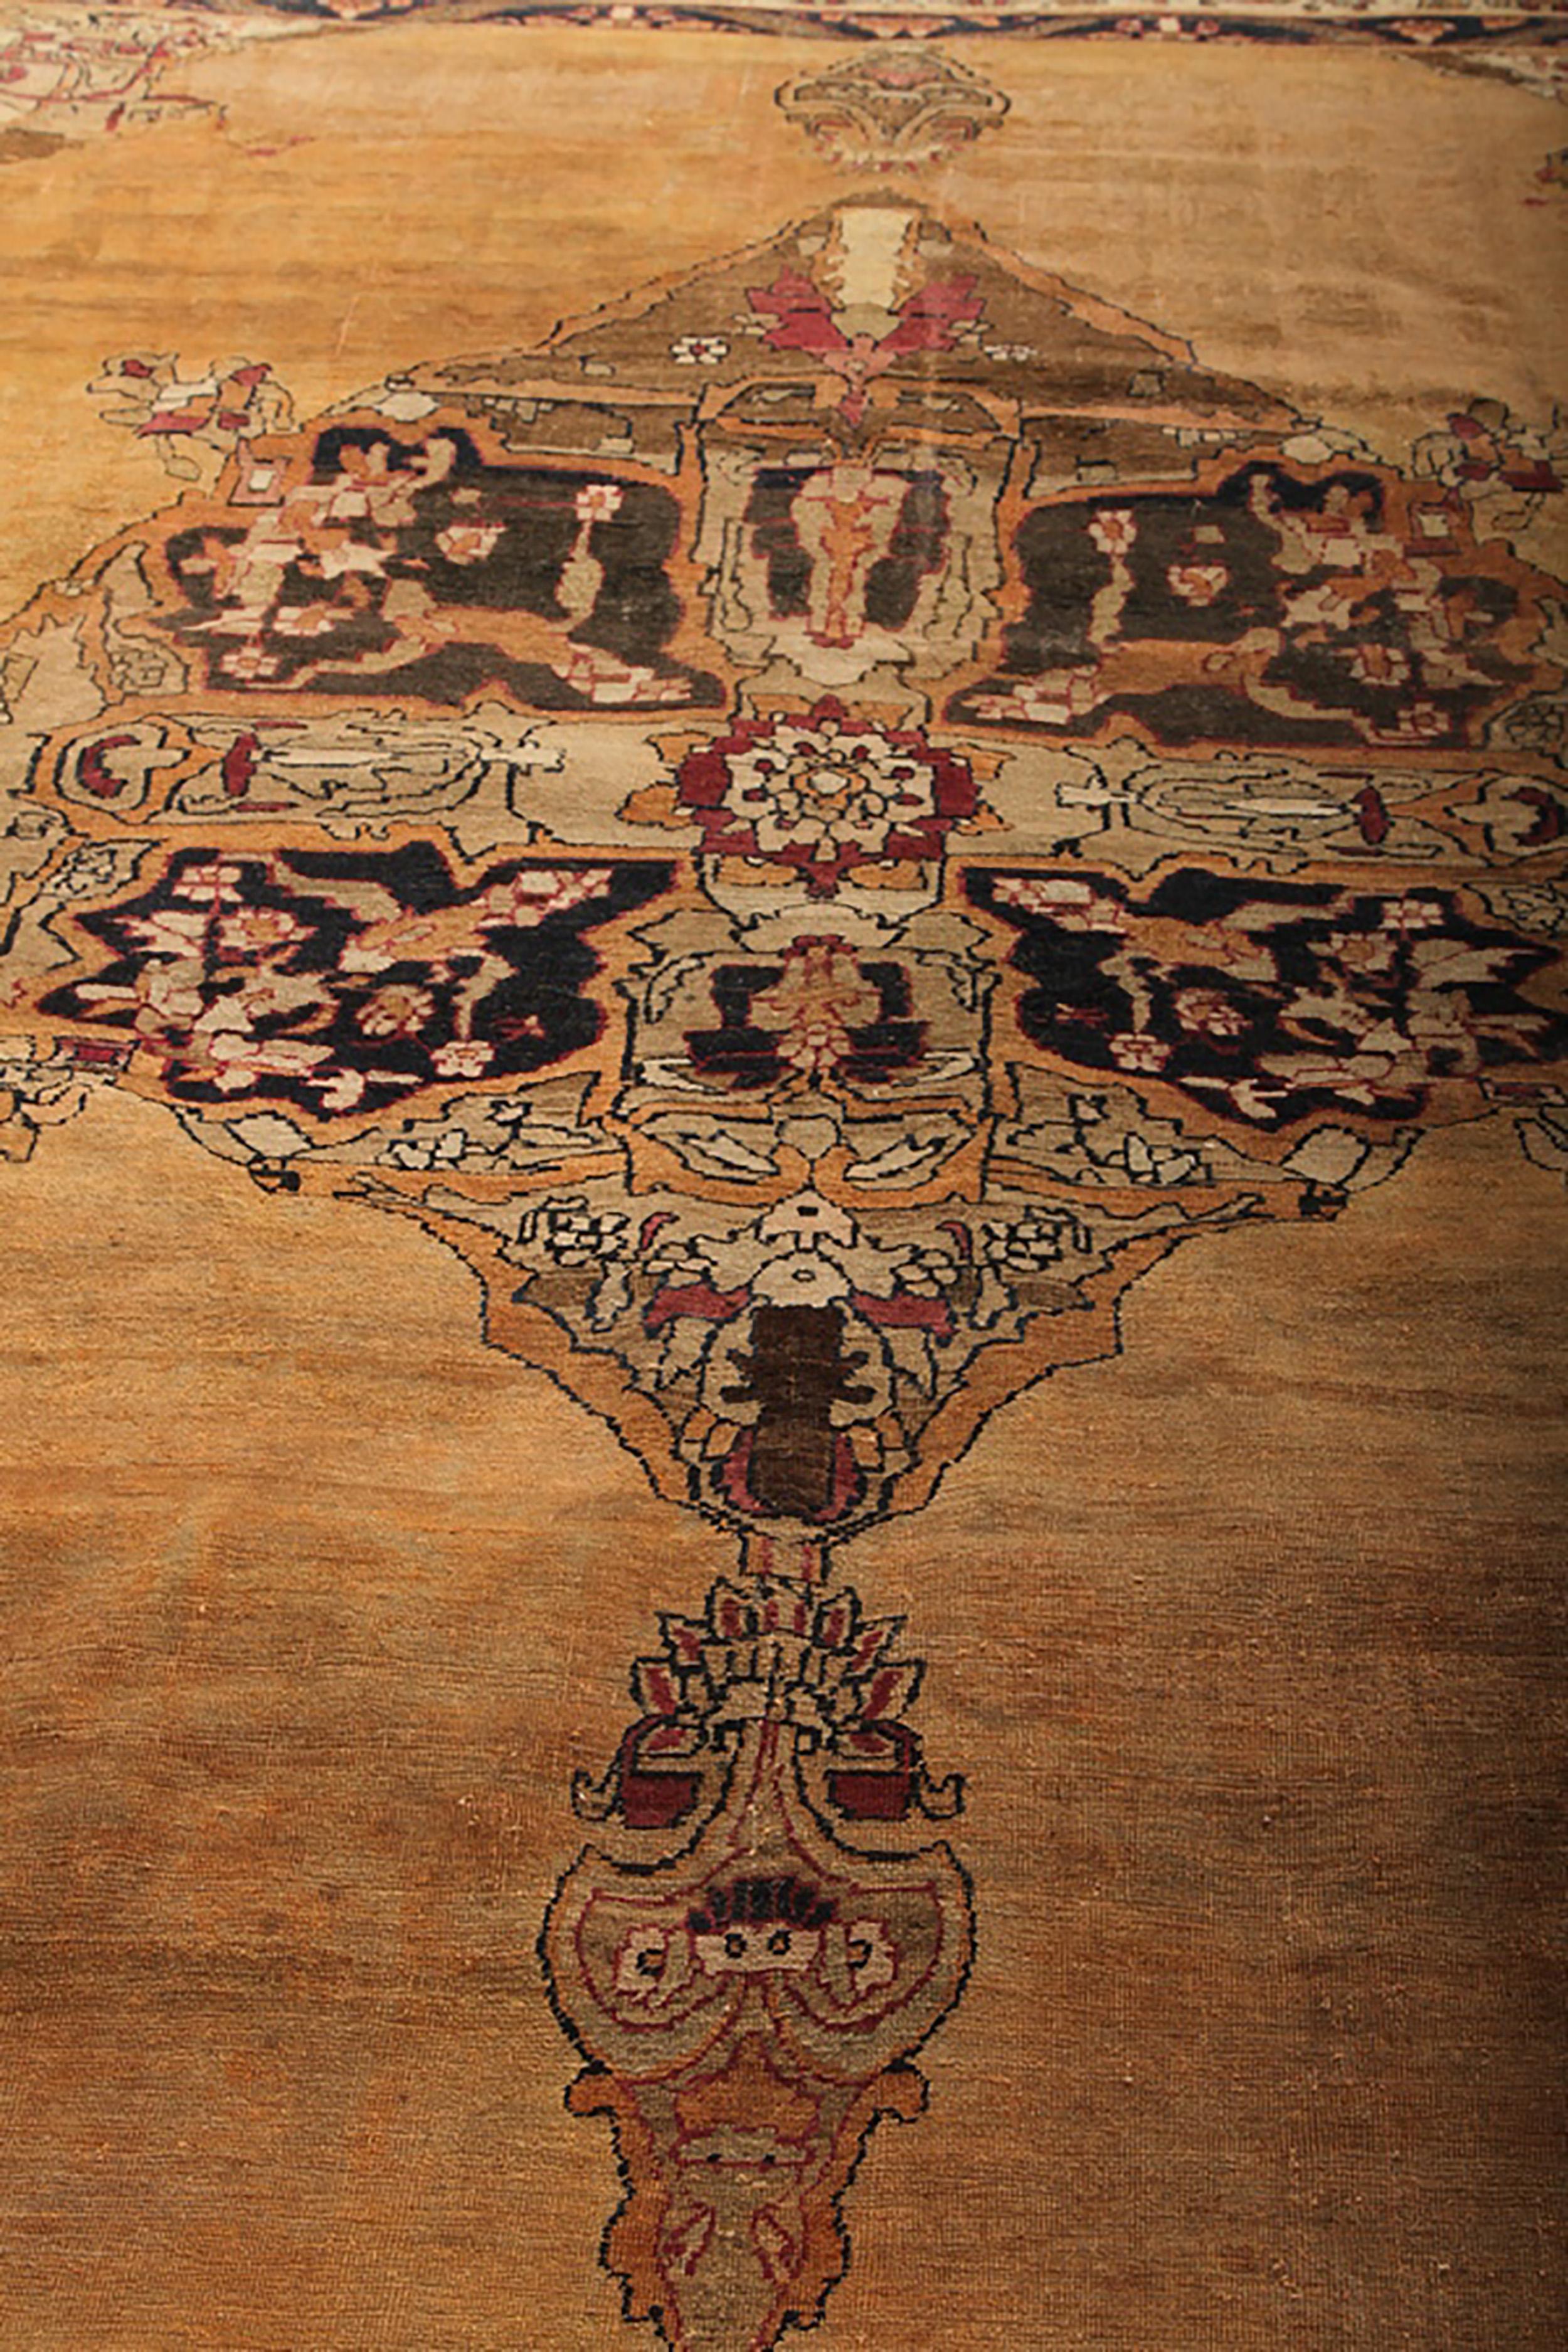 Hand knotted in wool originating circa 1890-1900, this antique Persian rug connotes the celebrated Kerman rug style, named for the titular region of renown for its pieces in regal scale and intricacy like this take on the venerated medallion style.